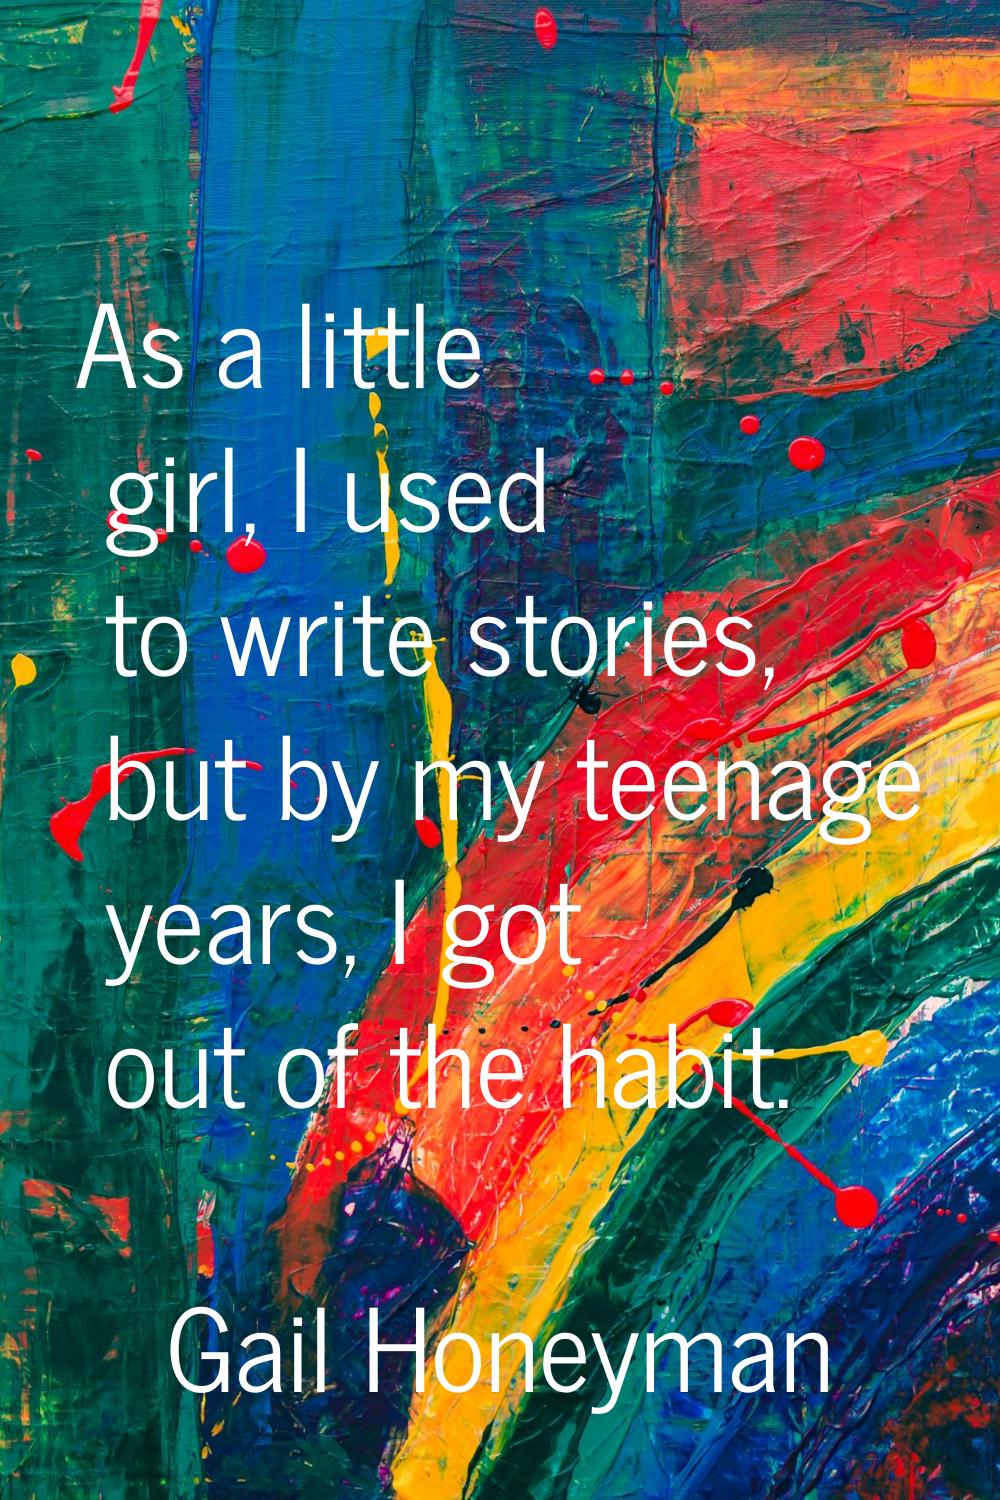 As a little girl, I used to write stories, but by my teenage years, I got out of the habit.